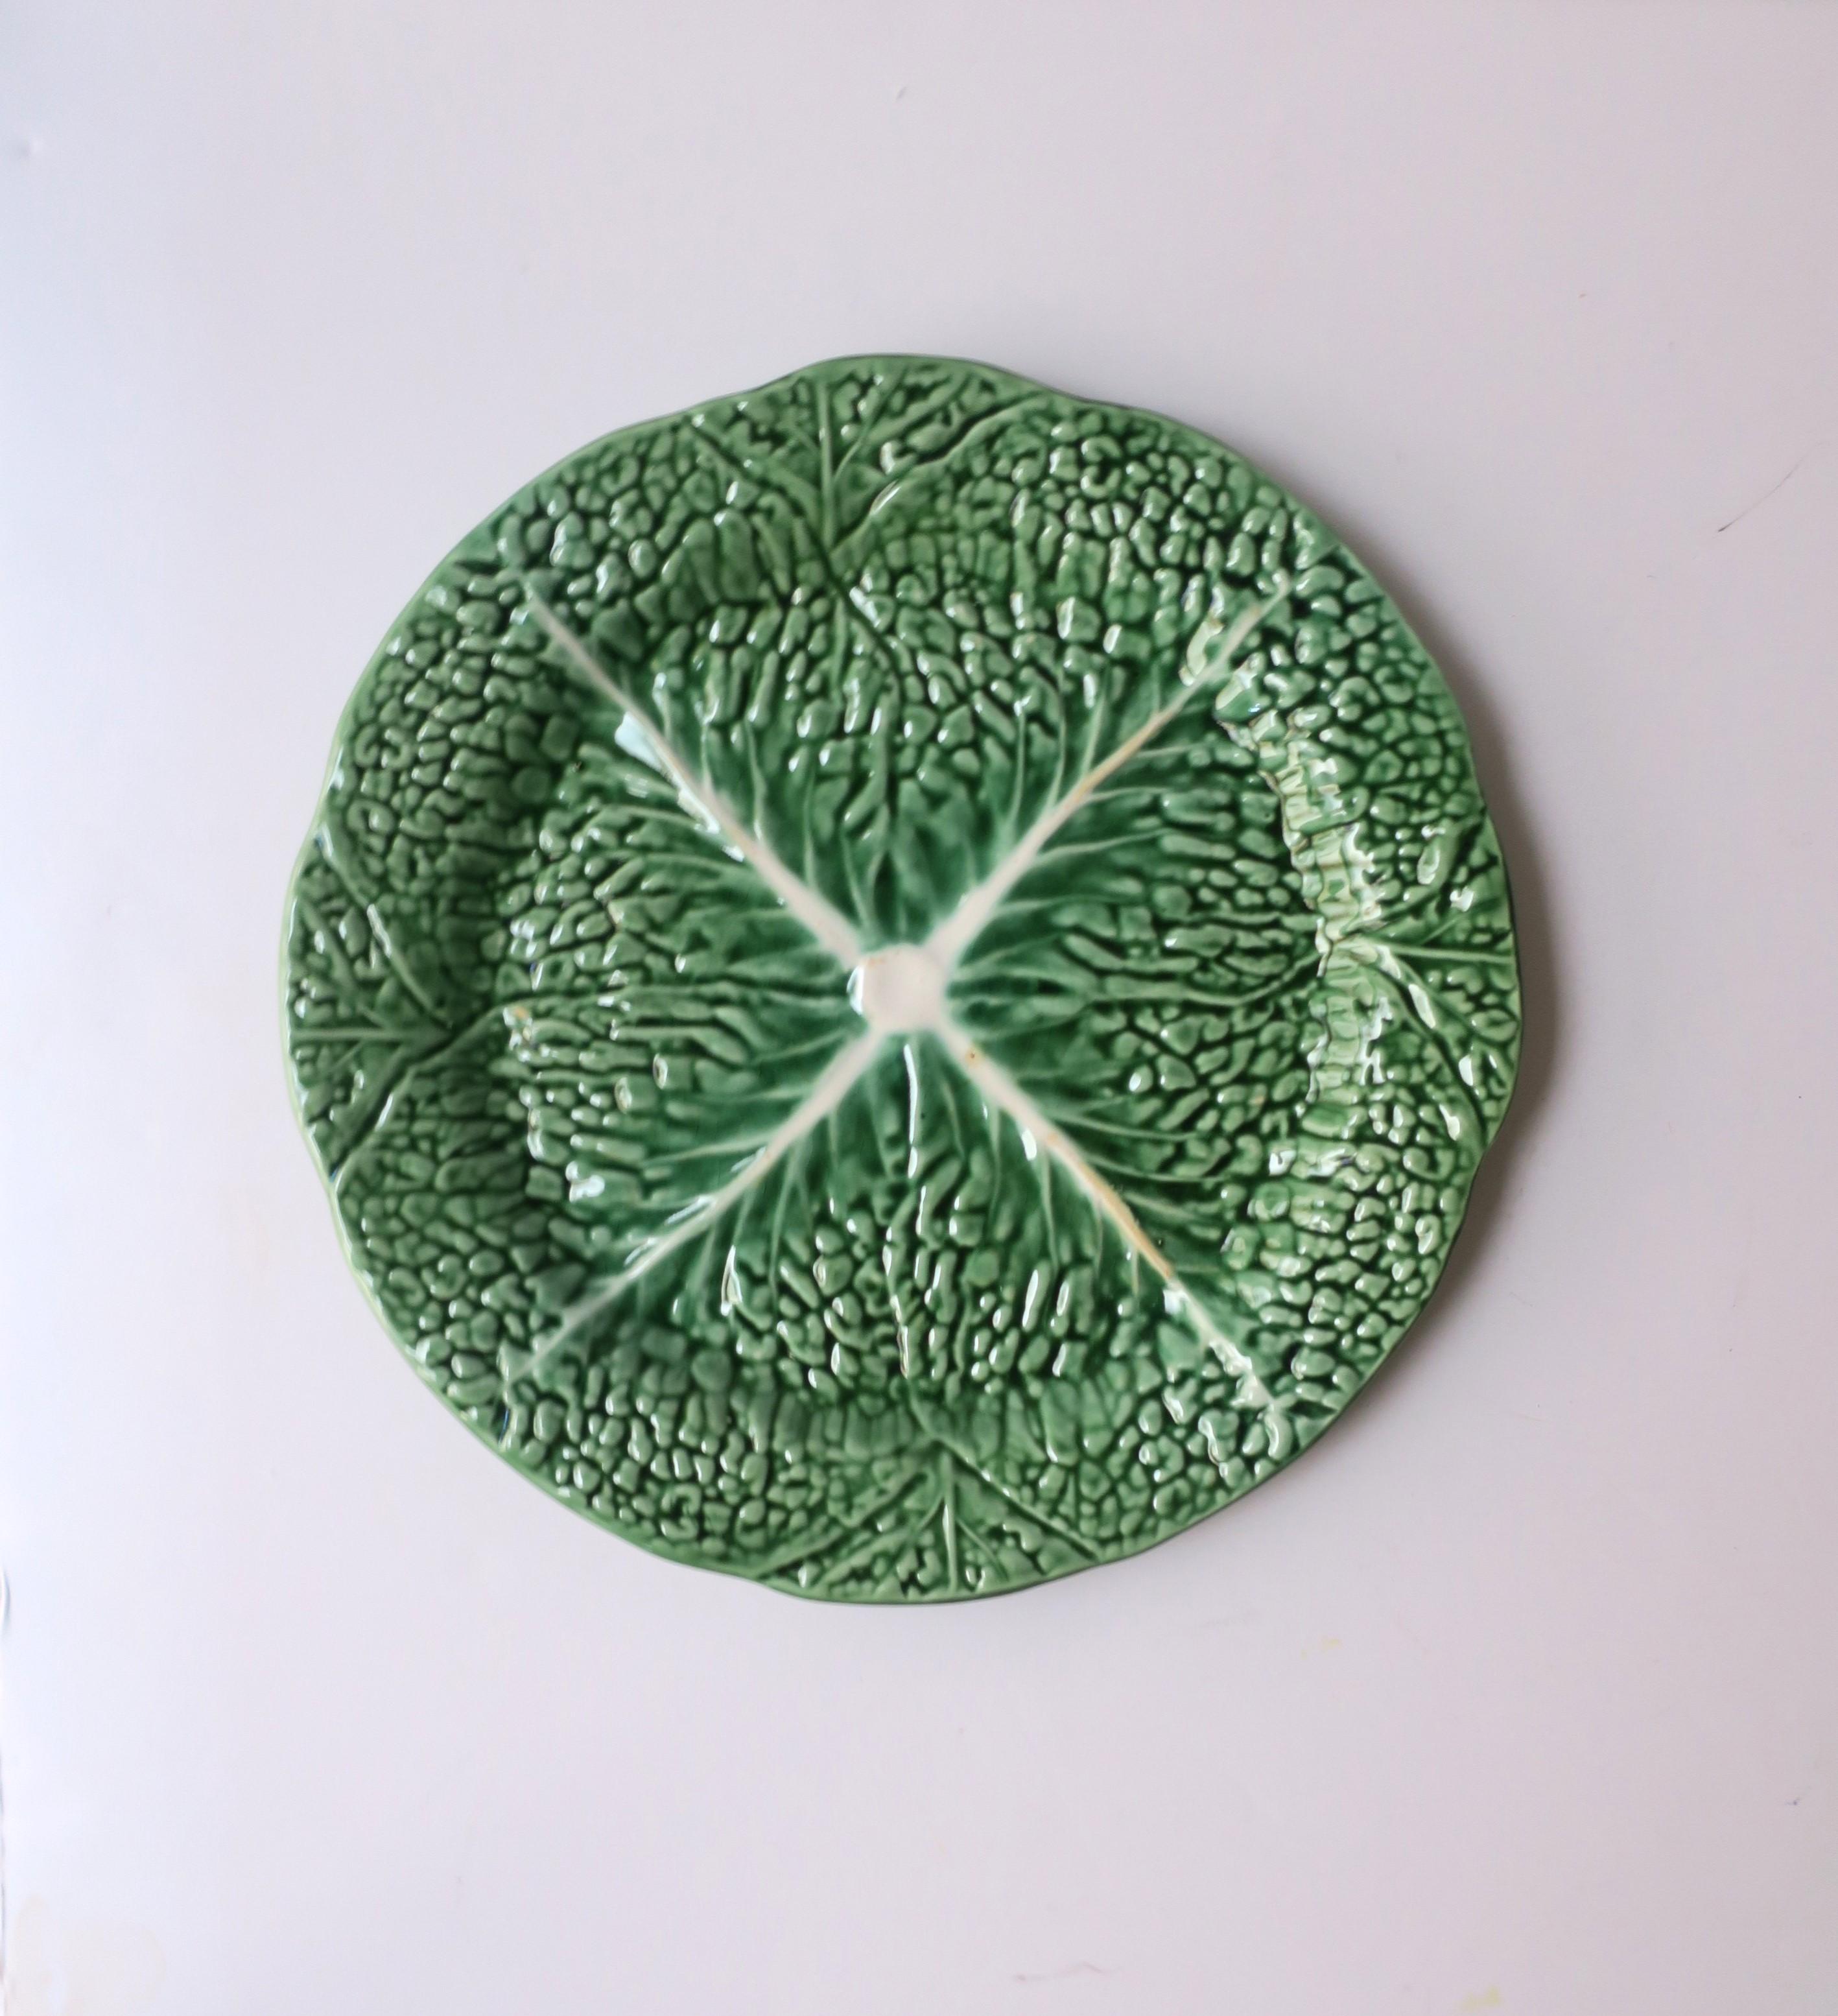 Glazed Lettuce or Cabbage Leaf Plates Green and White, Set of 4 For Sale